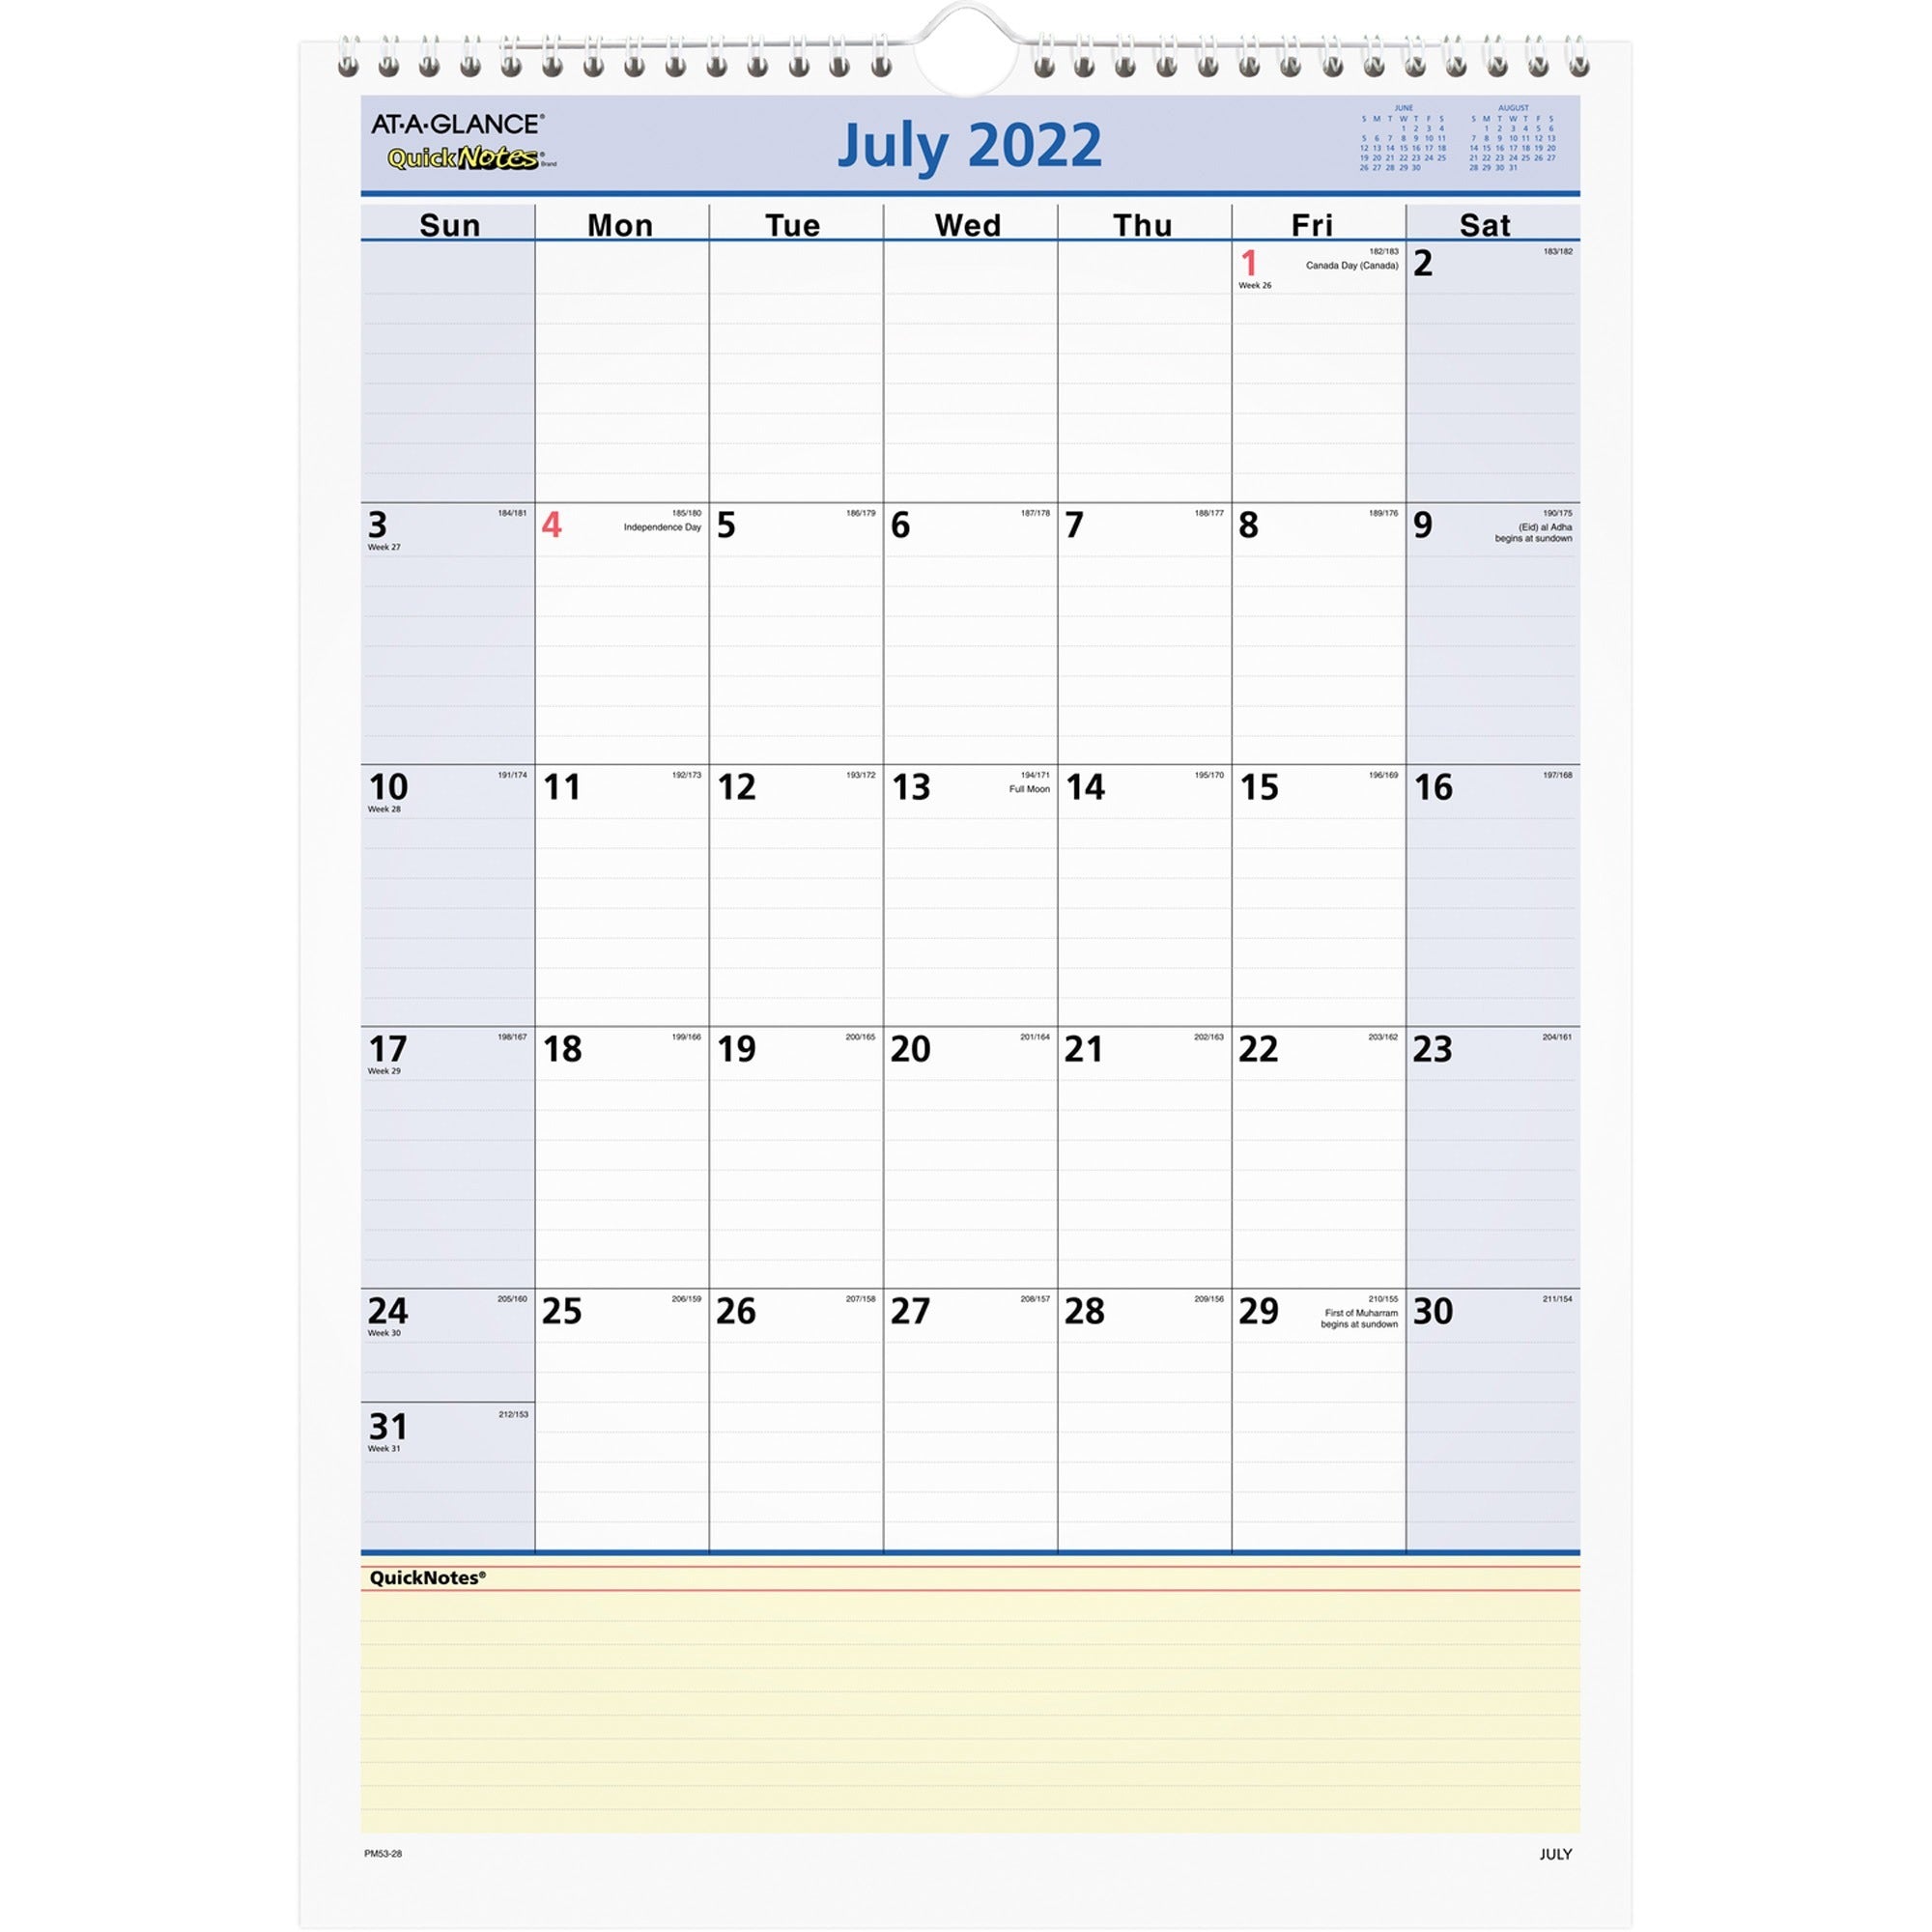 at-a-glance-quicknotes-academic-monthly-wall-calendar-julian-dates-monthly-1-year-july-2023-june-2024-1-month-single-page-layout-12-x-17-sheet-size-150-x-225-block-wire-bound-notes-area-task-list-appointment-schedule-remi_aagpm5328 - 1